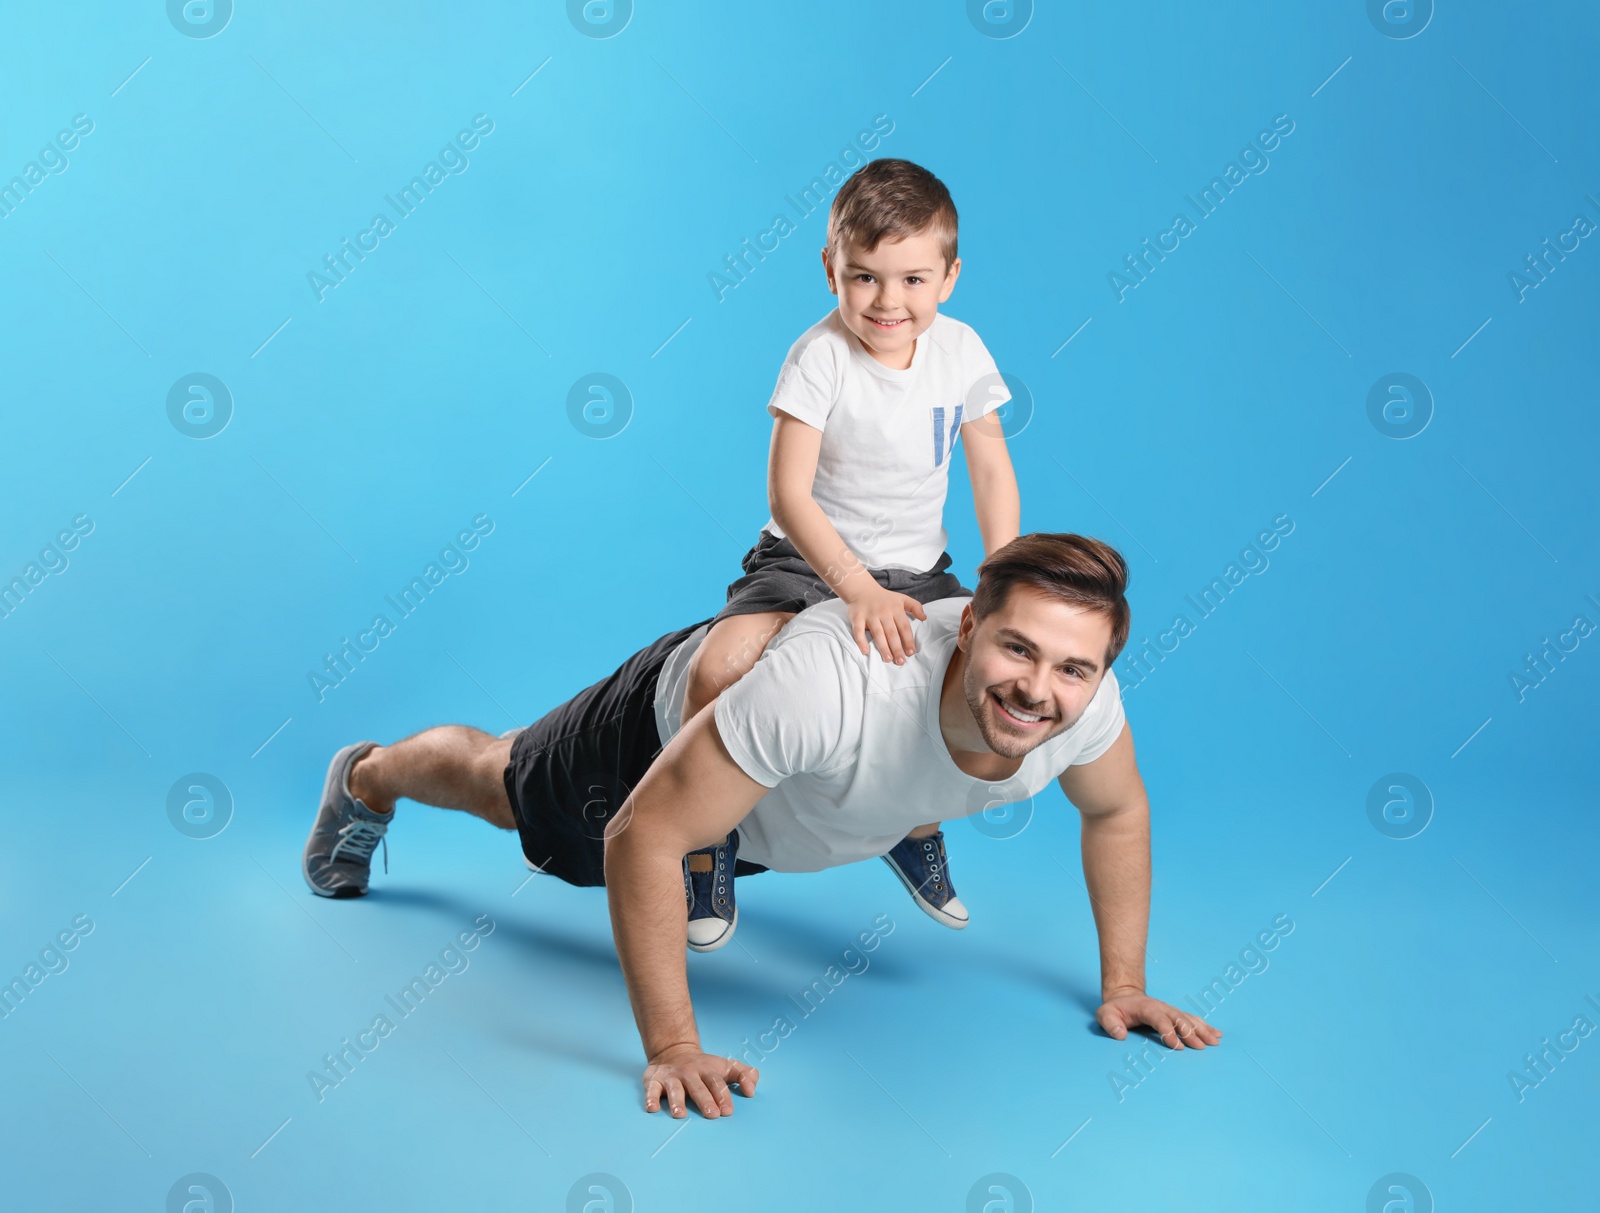 Photo of Dad doing push-ups with son on his back against color background